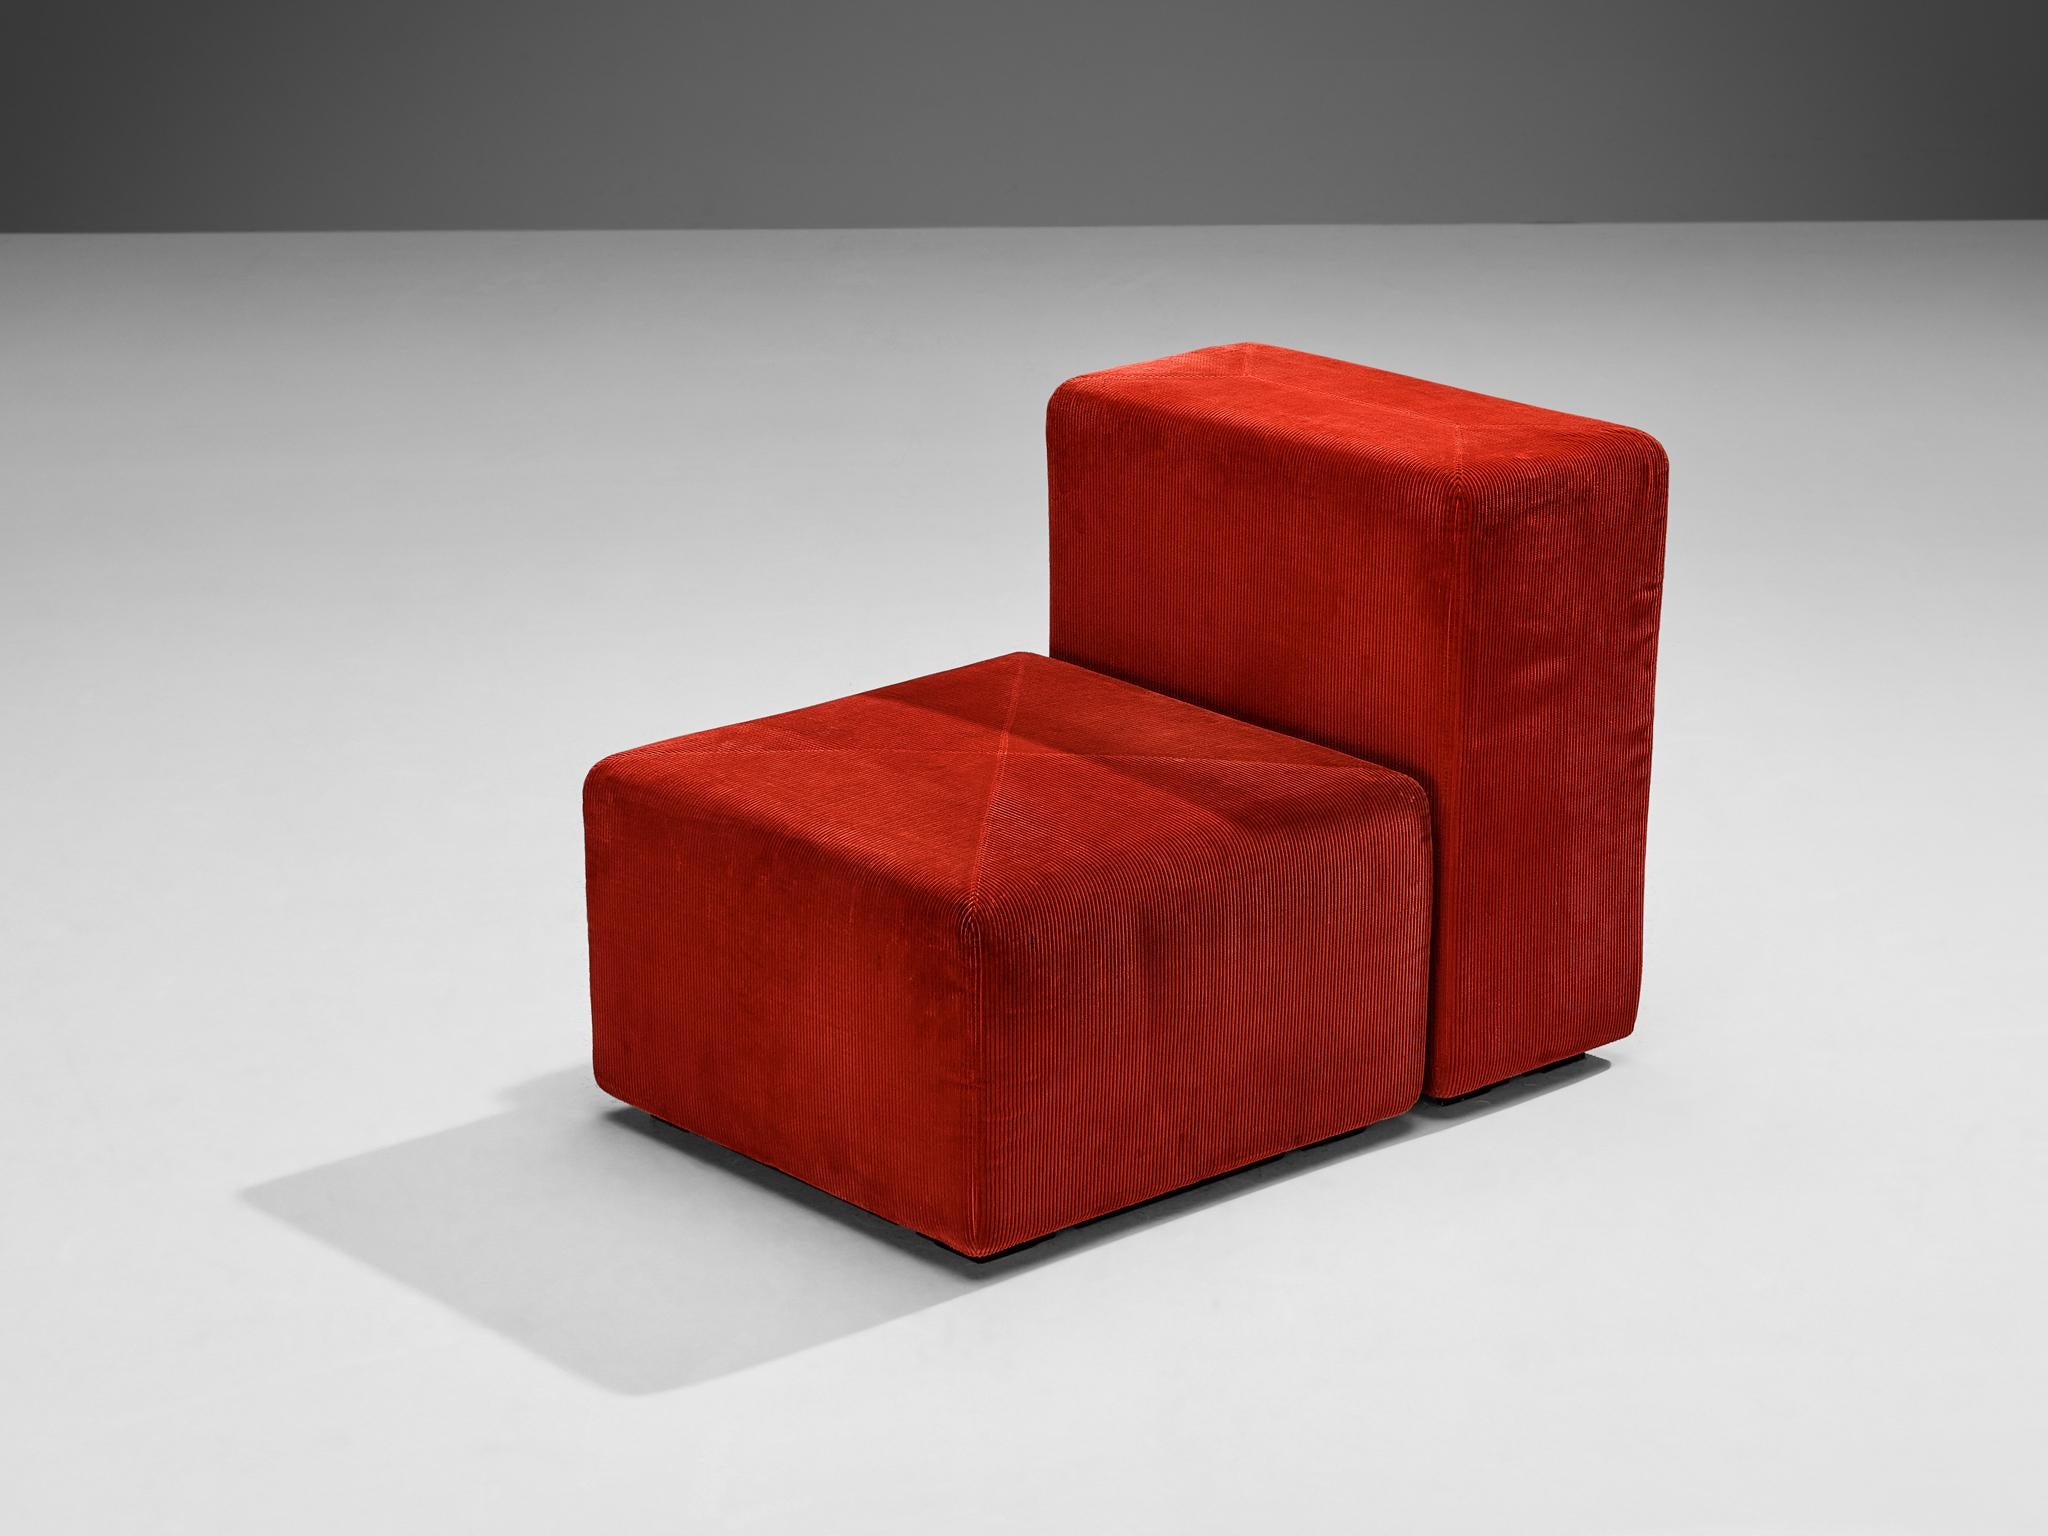 Giancarlo Piretti for Anonima Castelli, 'Sistema 61' pair of lounge chair,, fabric, plastic, Italy, 1973

In the realm of 1970s design, the Sistema 61 emerges as a striking testament to the Italian design world, where it was commonplace to see sofas